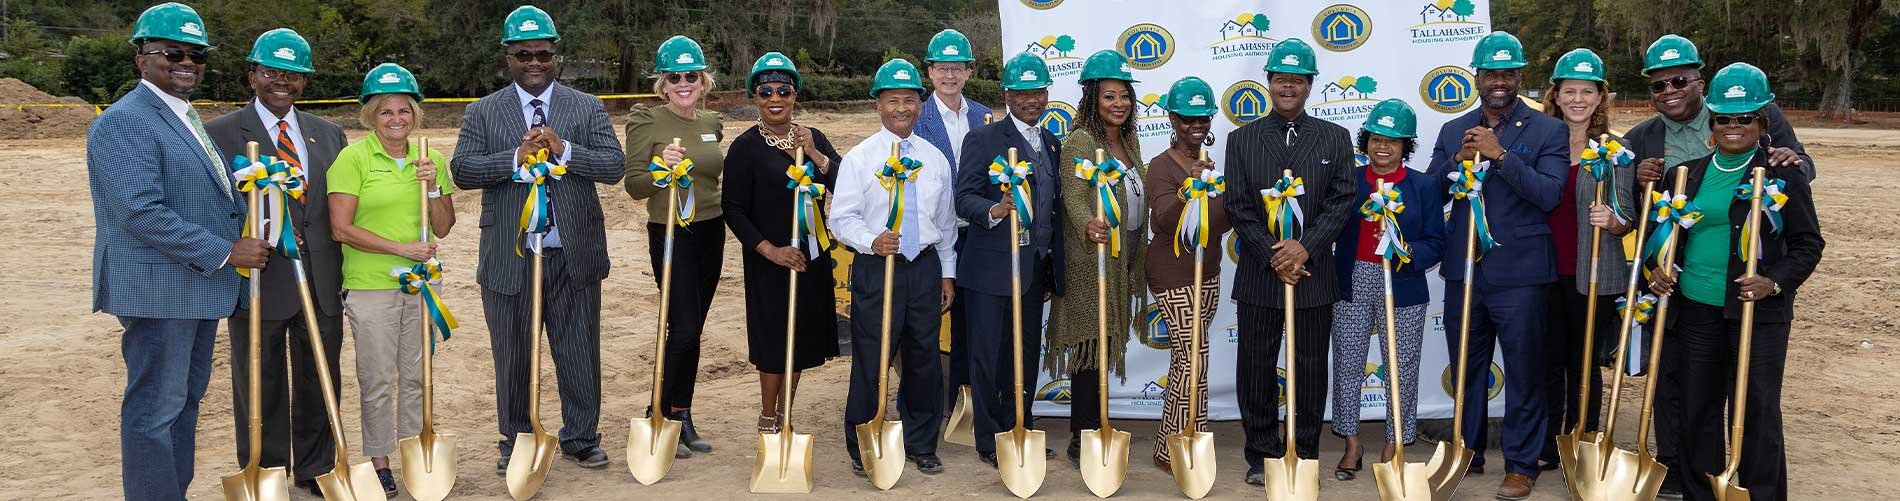 Group of people wearing green hard hats and holding gold shovels at groundbreaking event